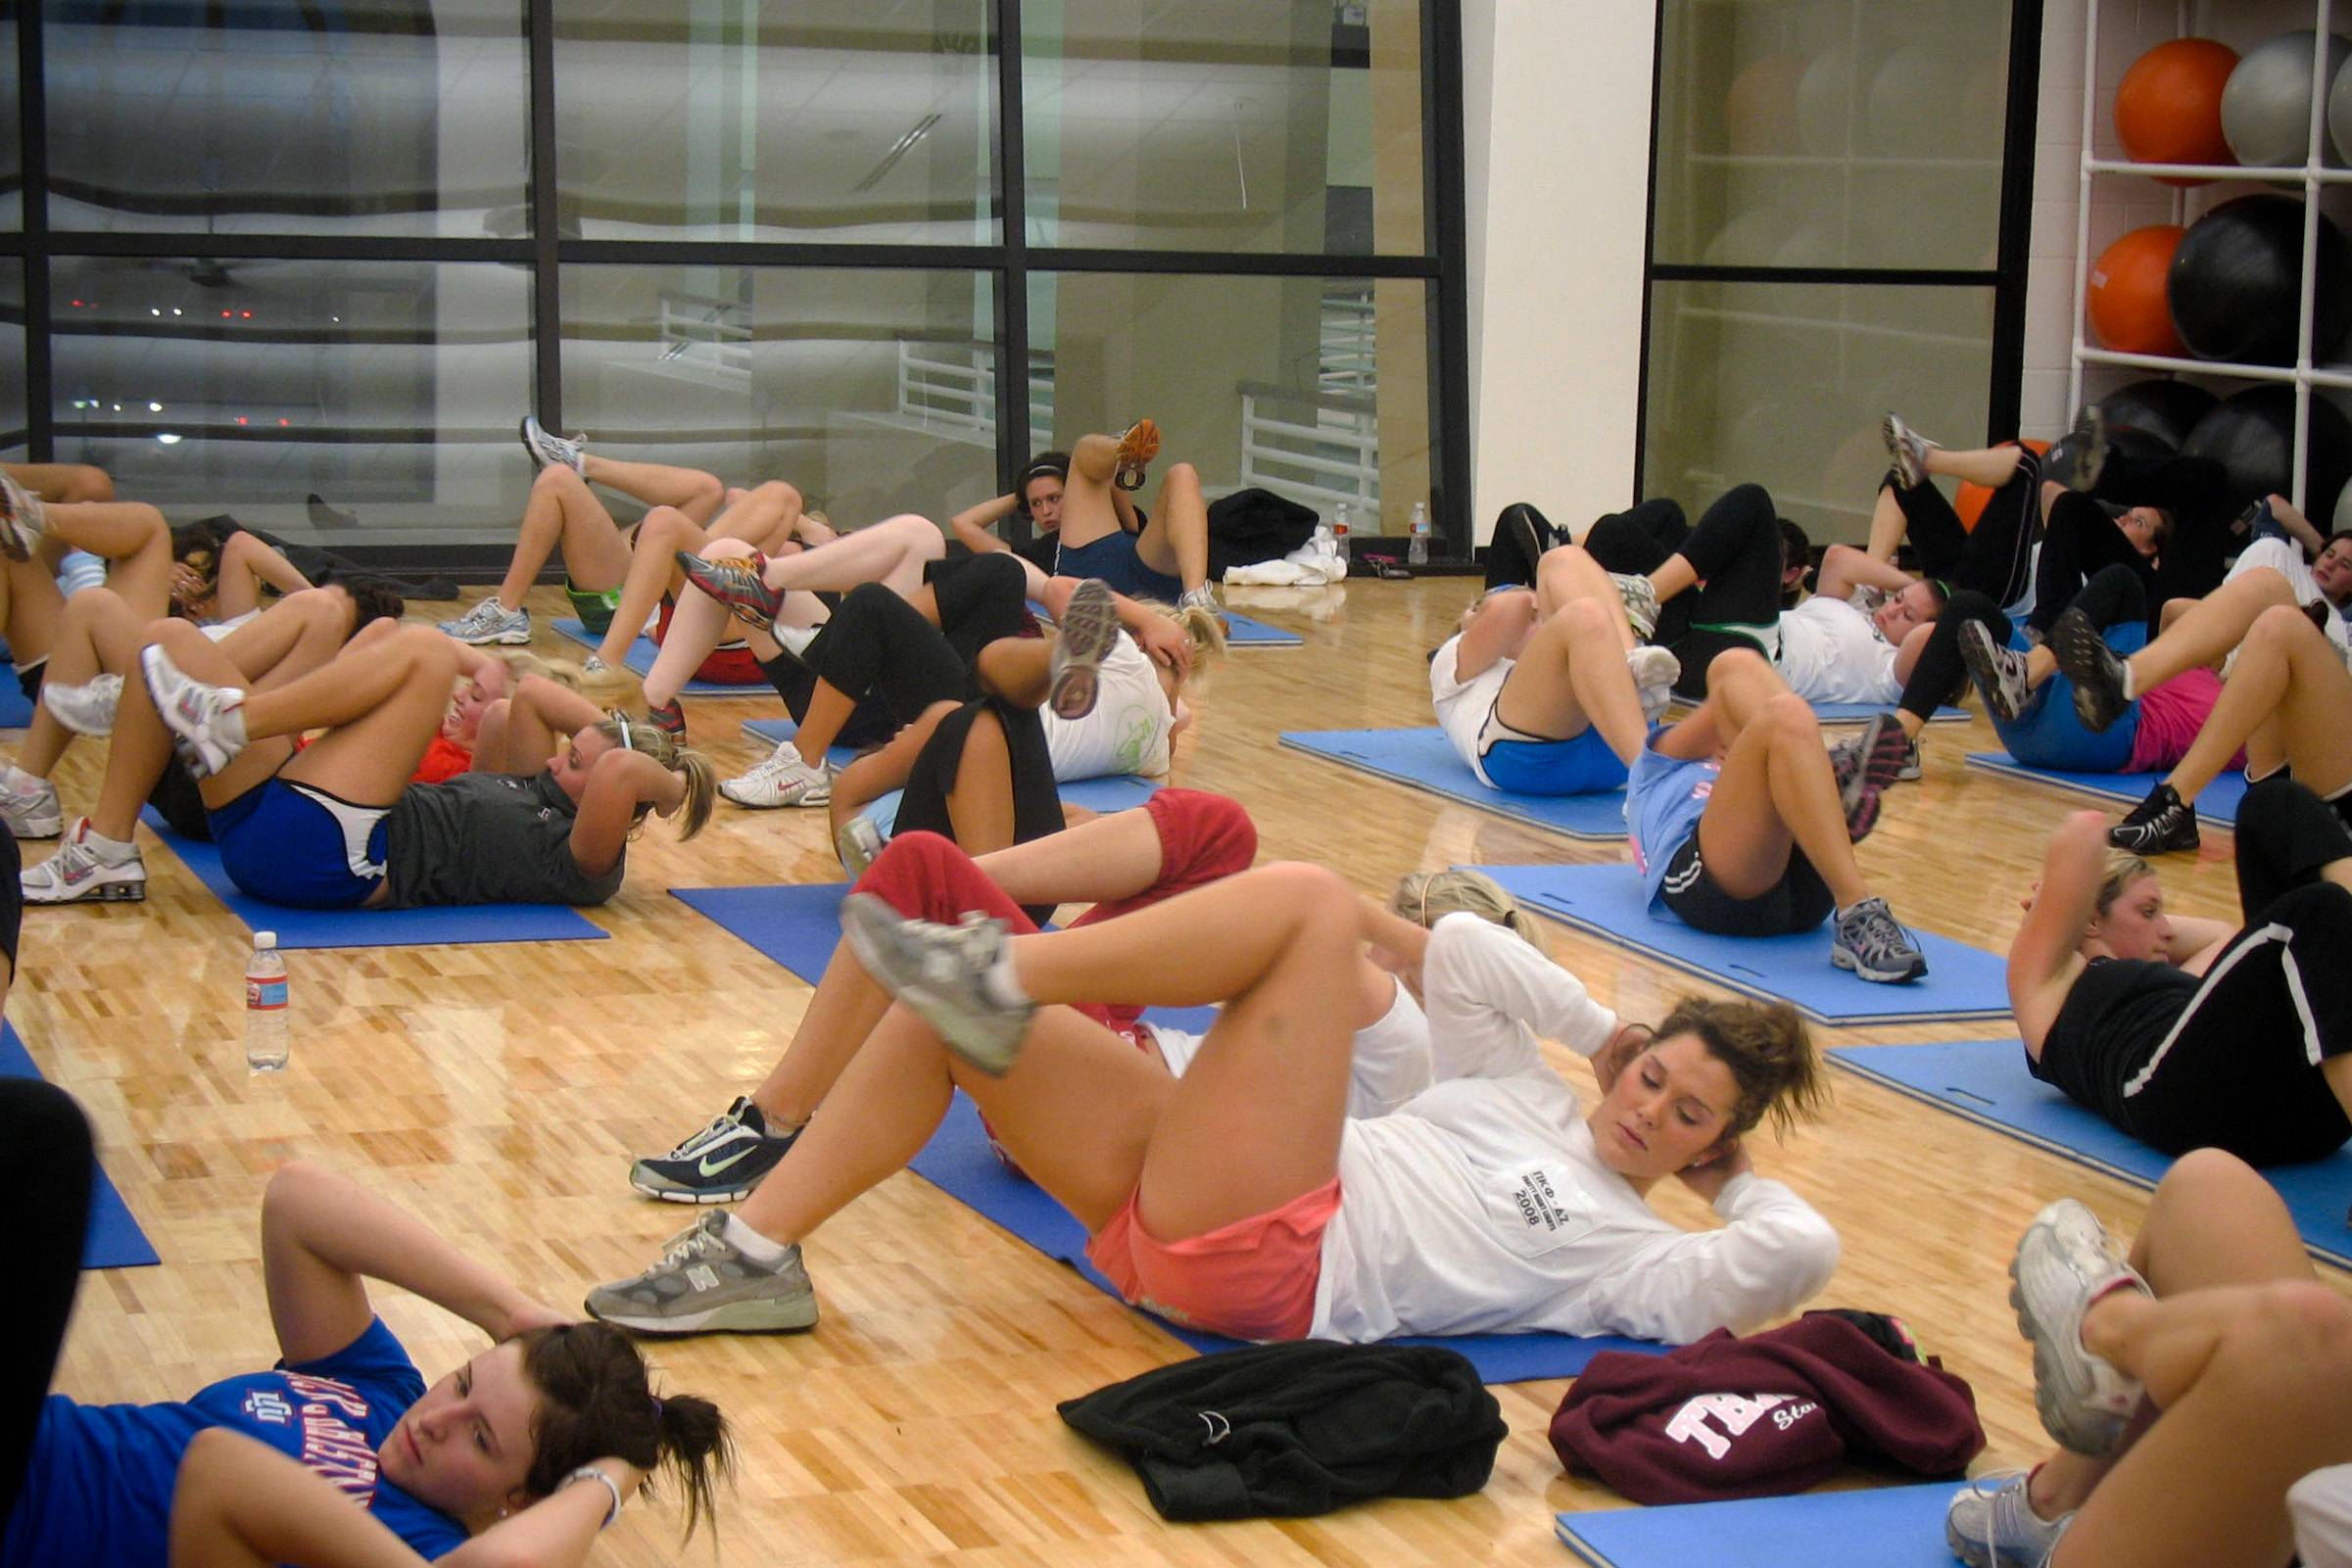 The Workout Room at the Student Recreation Center